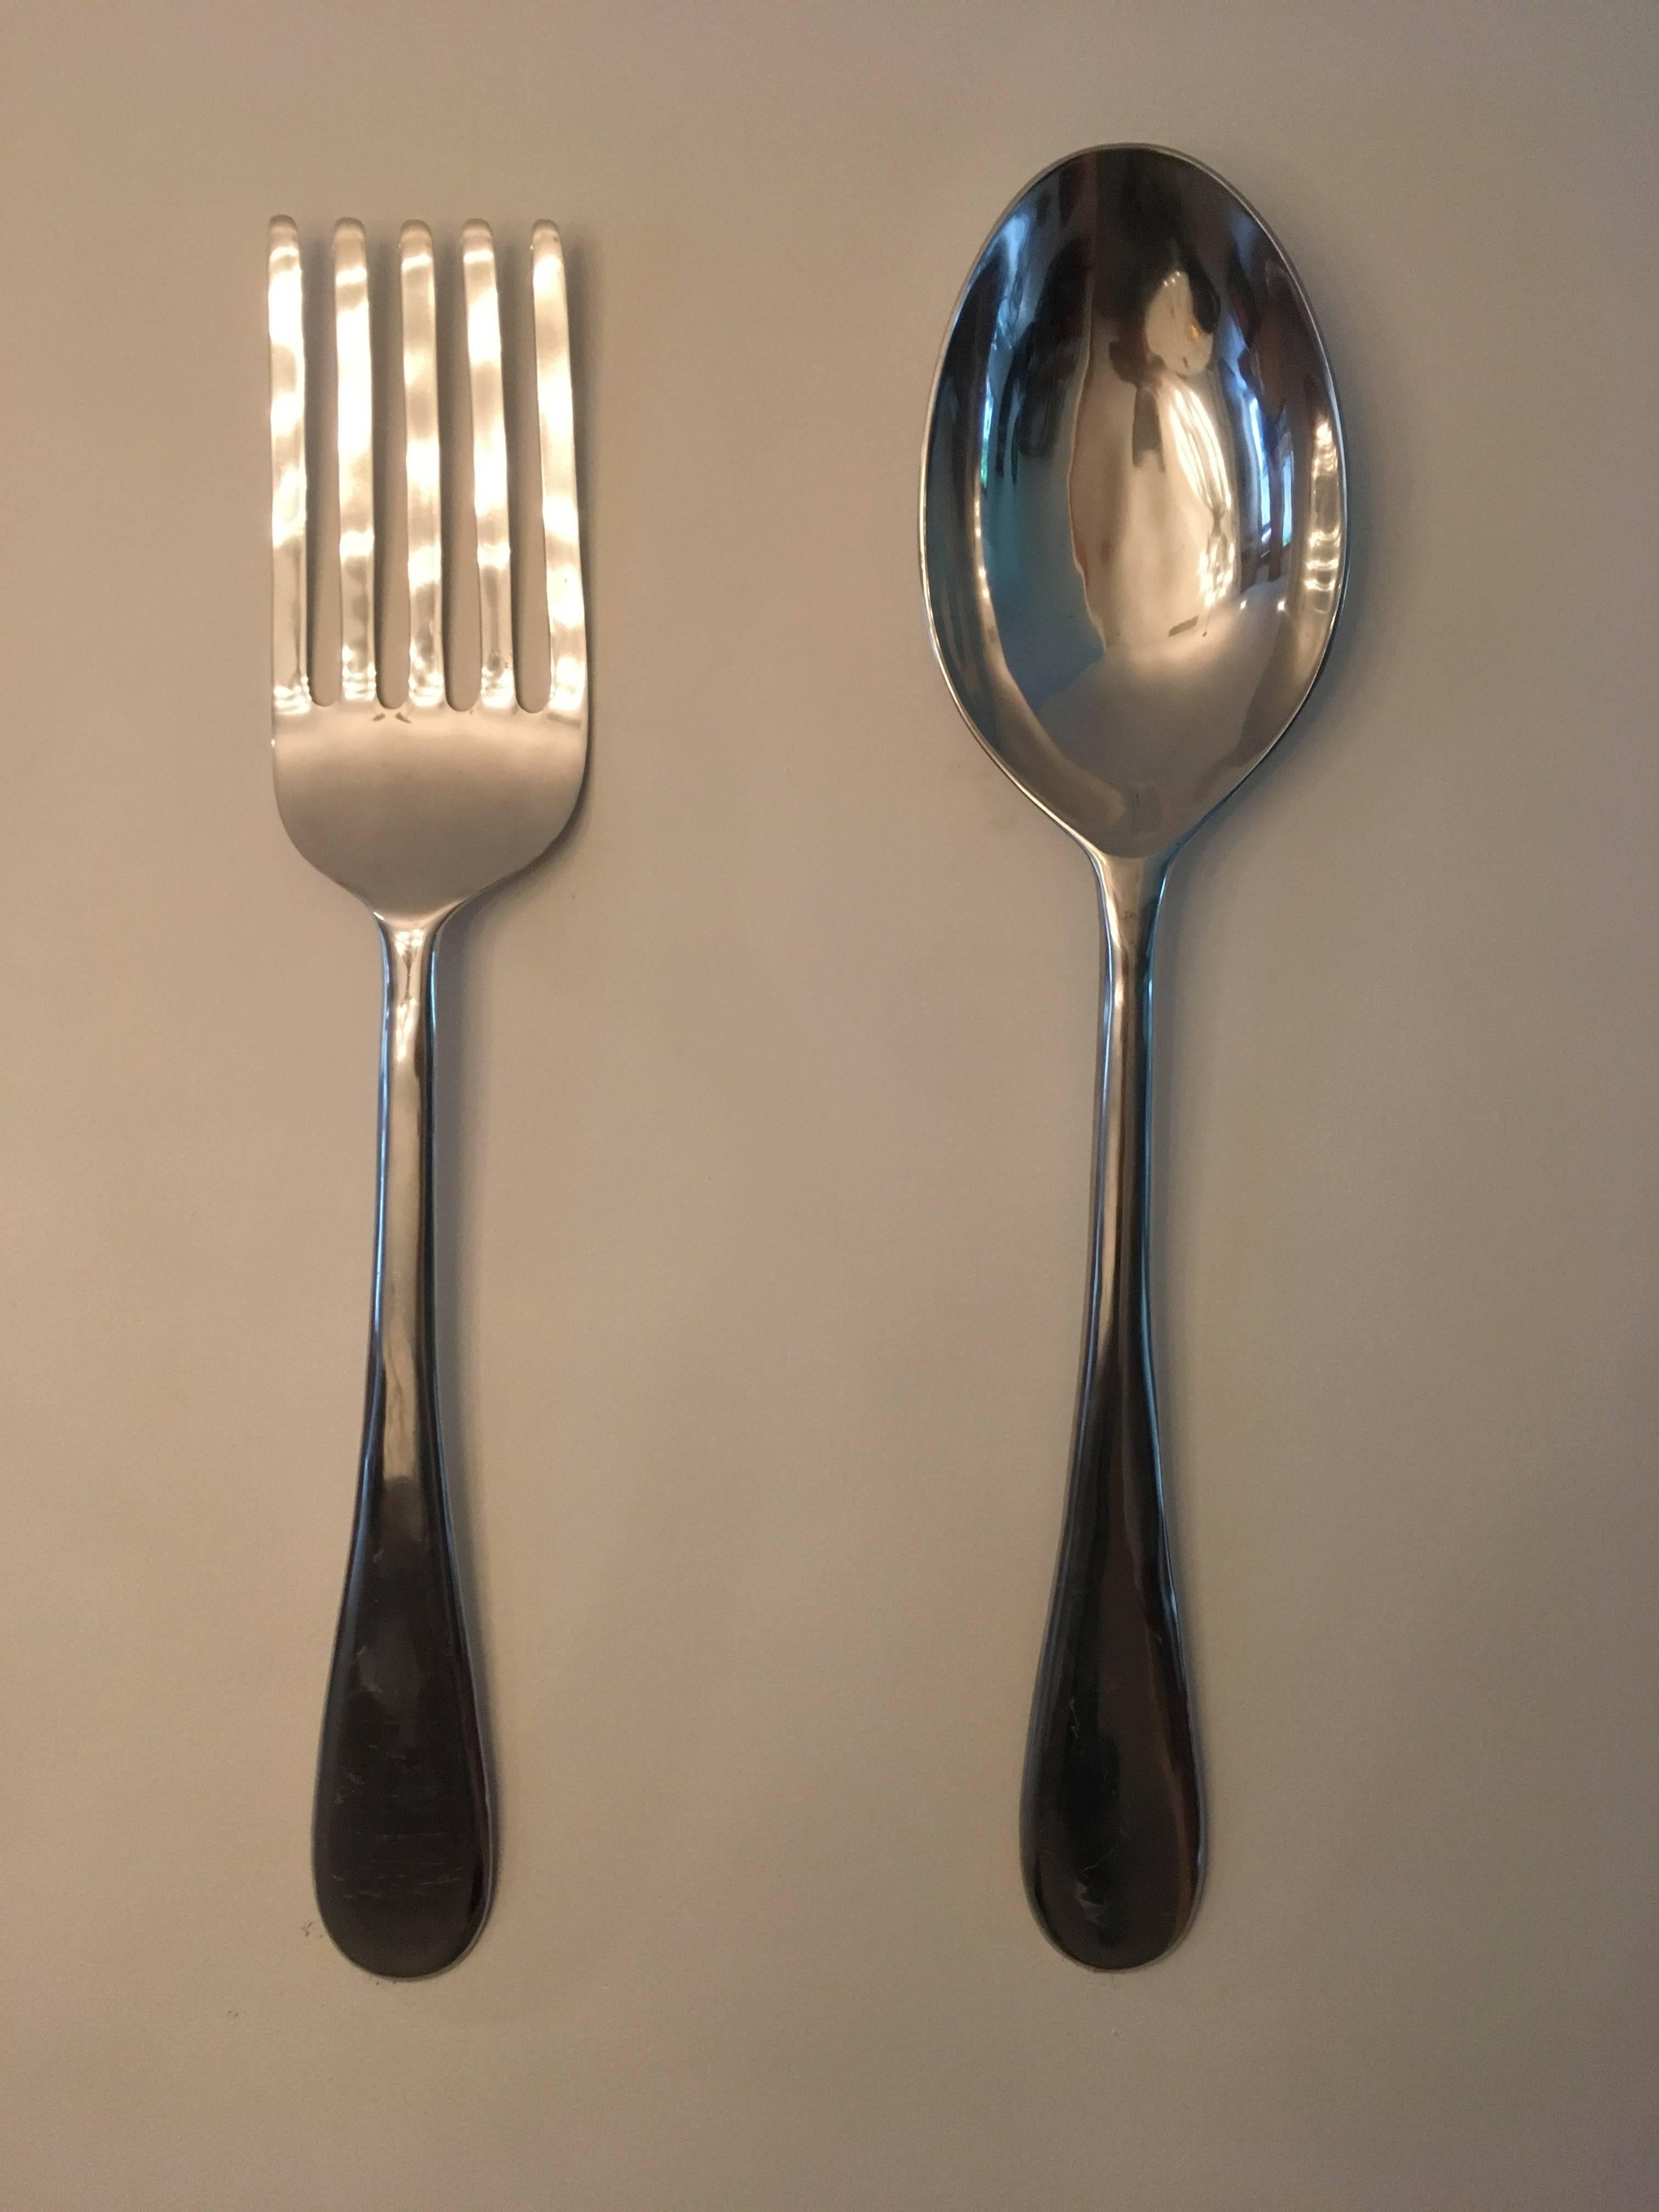 Interesting oversized fork and spoon made of heavy aluminium. Great sculptural objects. Sold as a set.